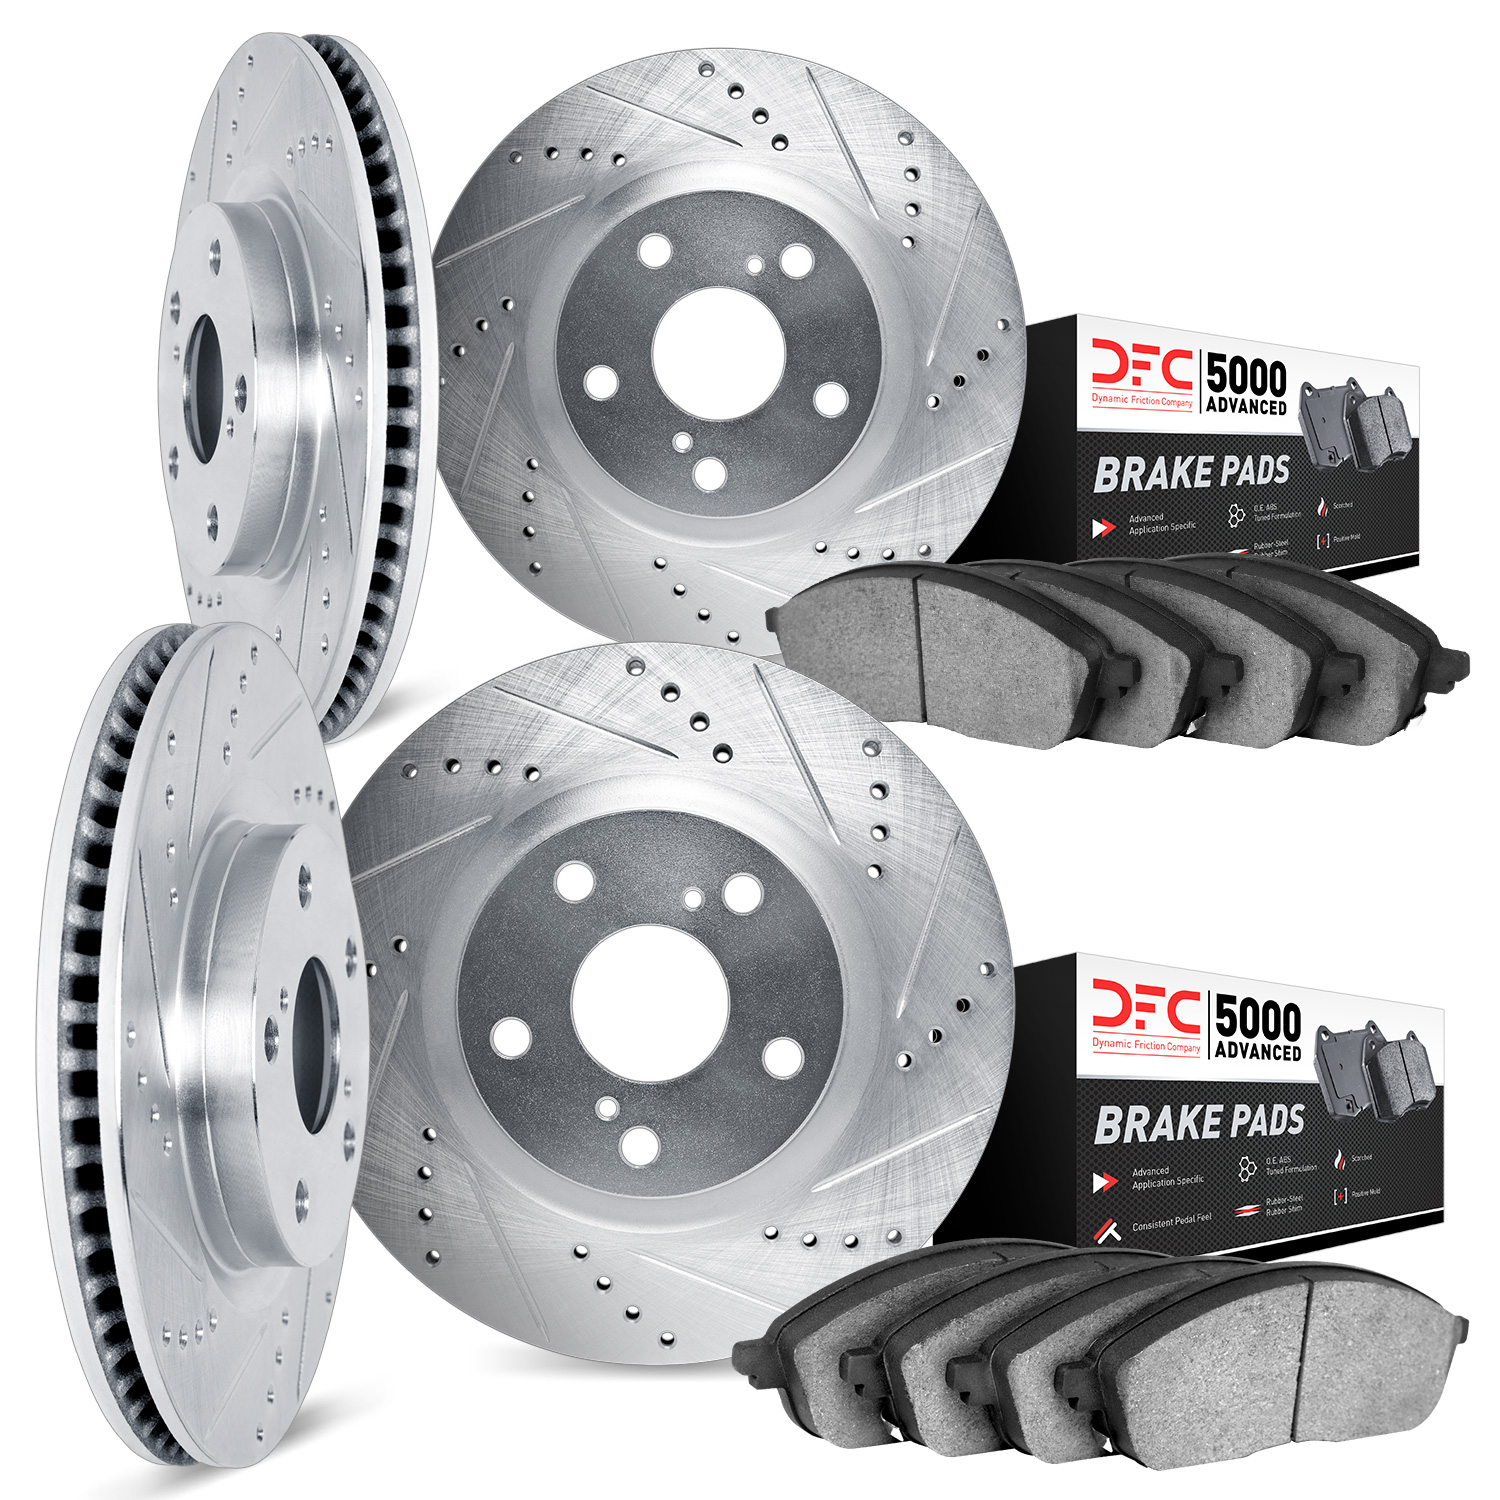 7504-40238 Drilled/Slotted Brake Rotors w/5000 Advanced Brake Pads Kit [Silver], 2002-2006 Mopar, Position: Front and Rear